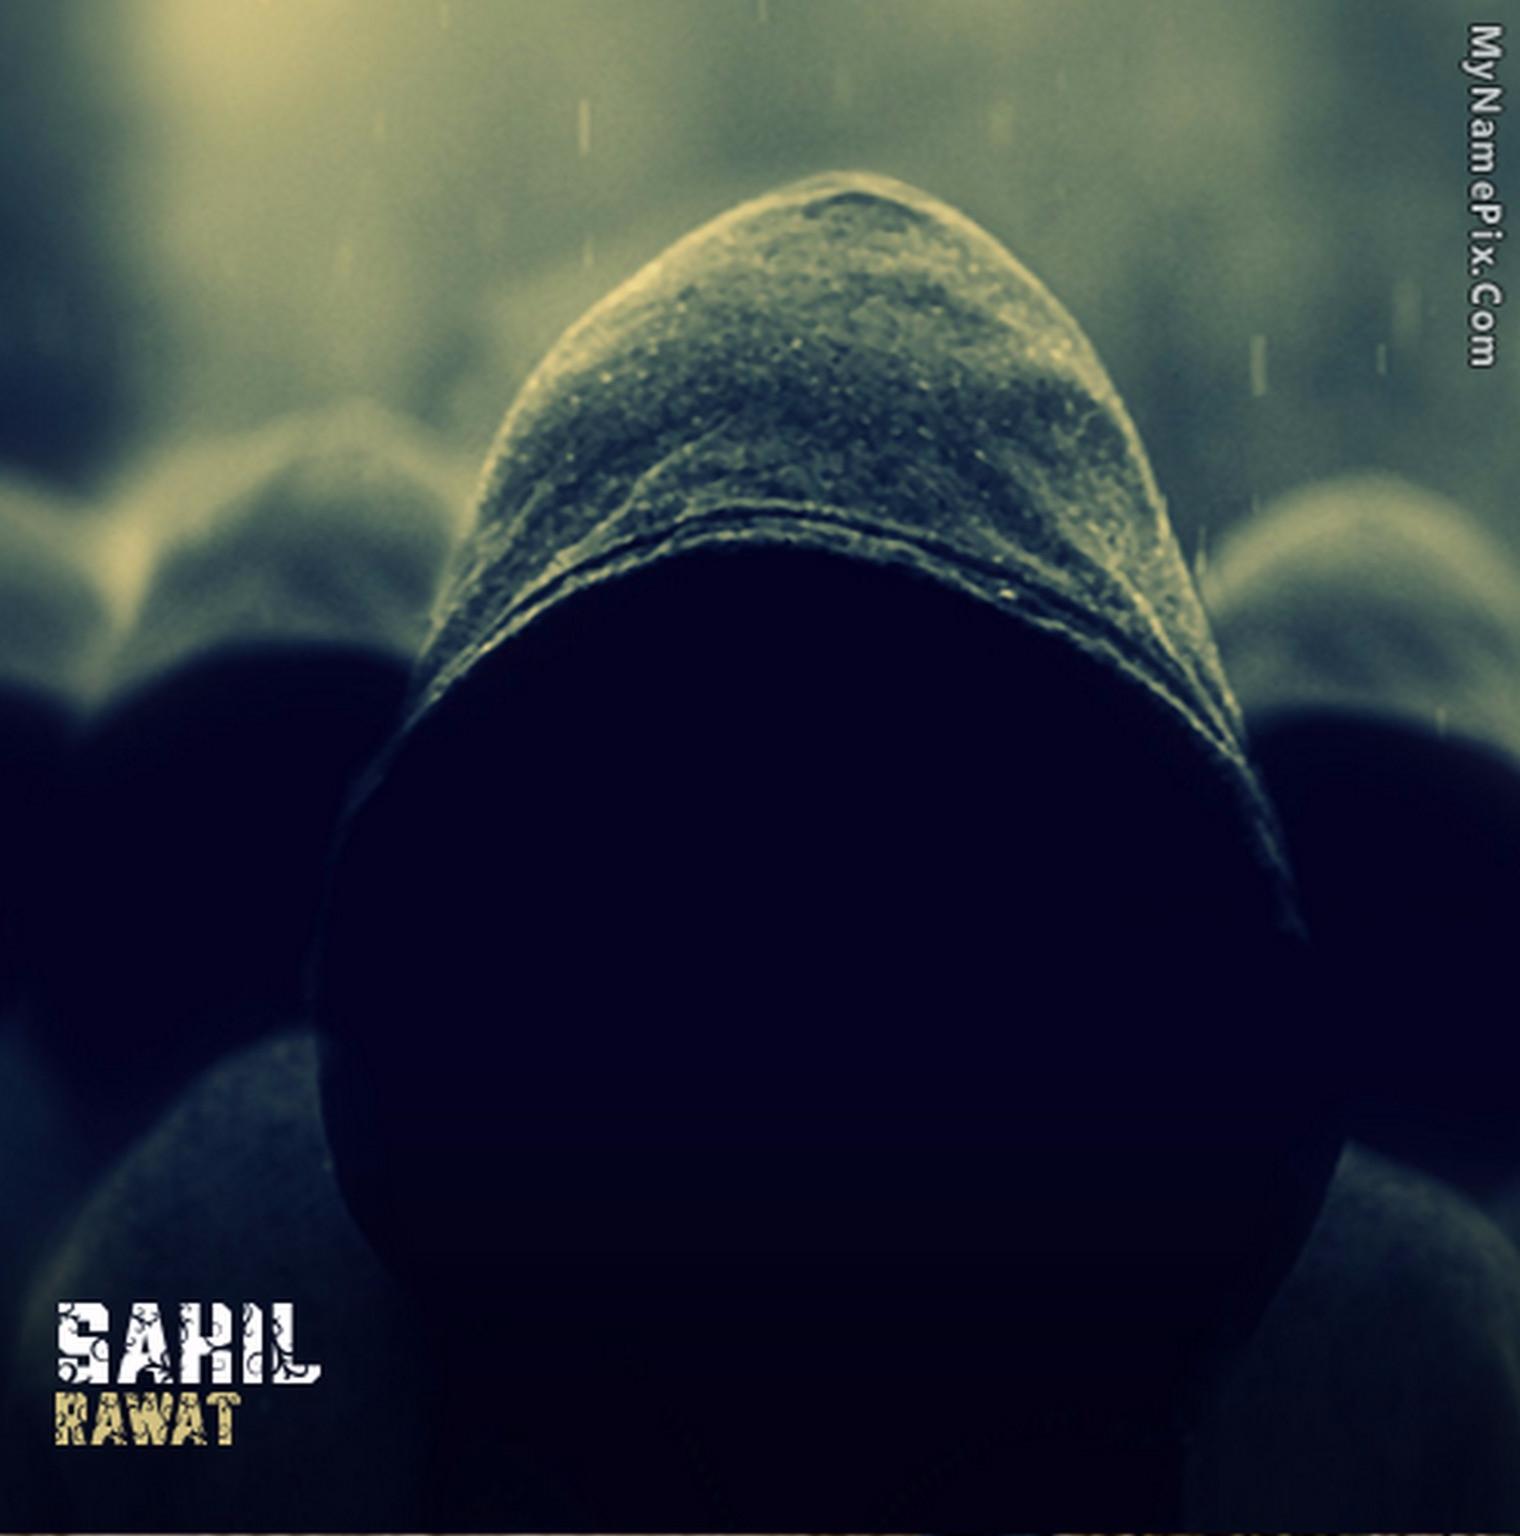 show me the meaning by sahil rawat Voice 010